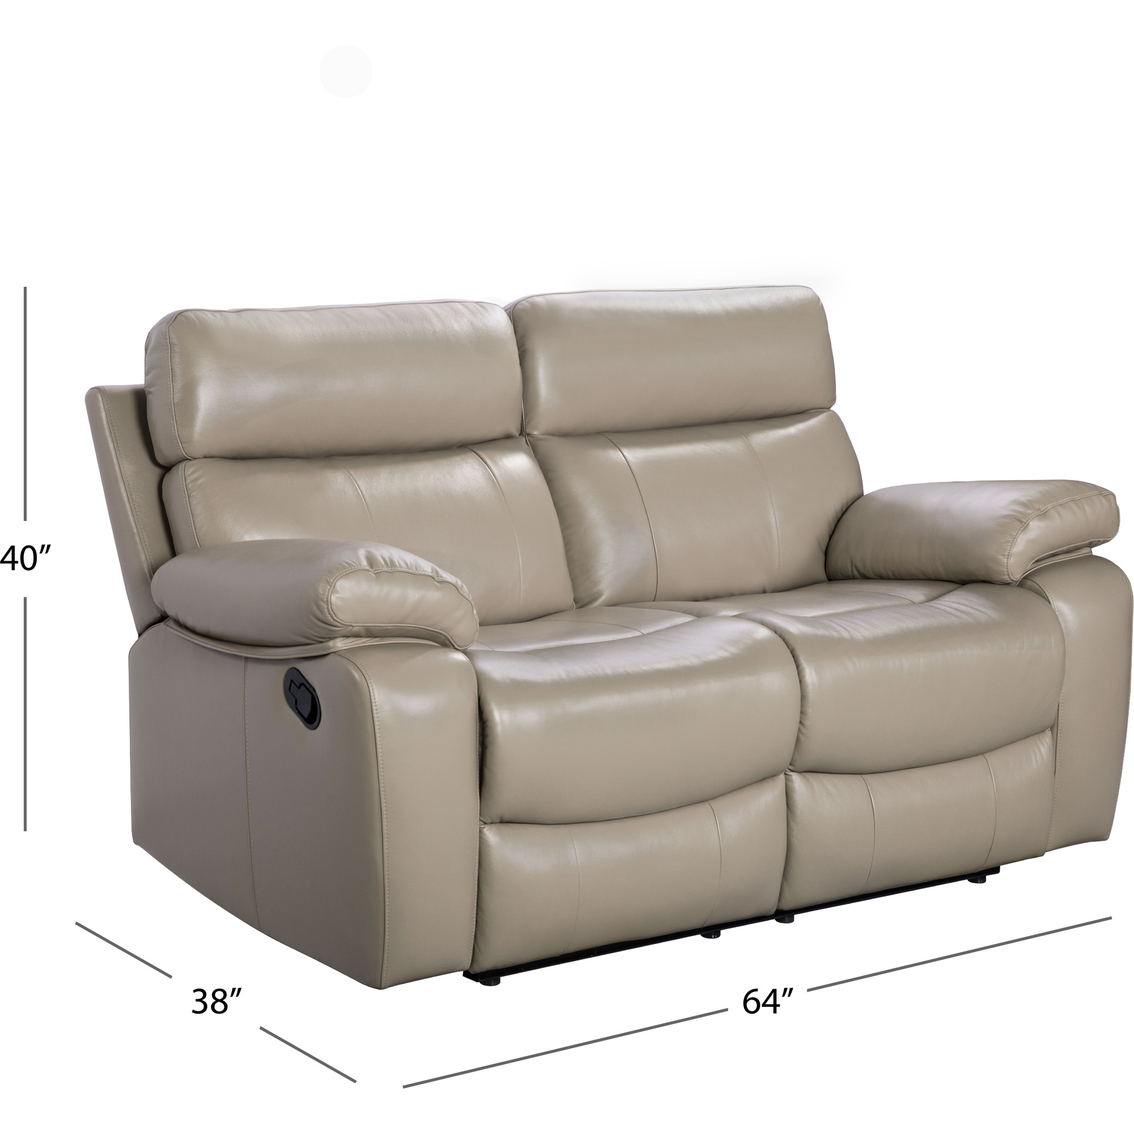 Abbyson Crafton Reclining Loveseat | Sofas & Couches | Furniture ...